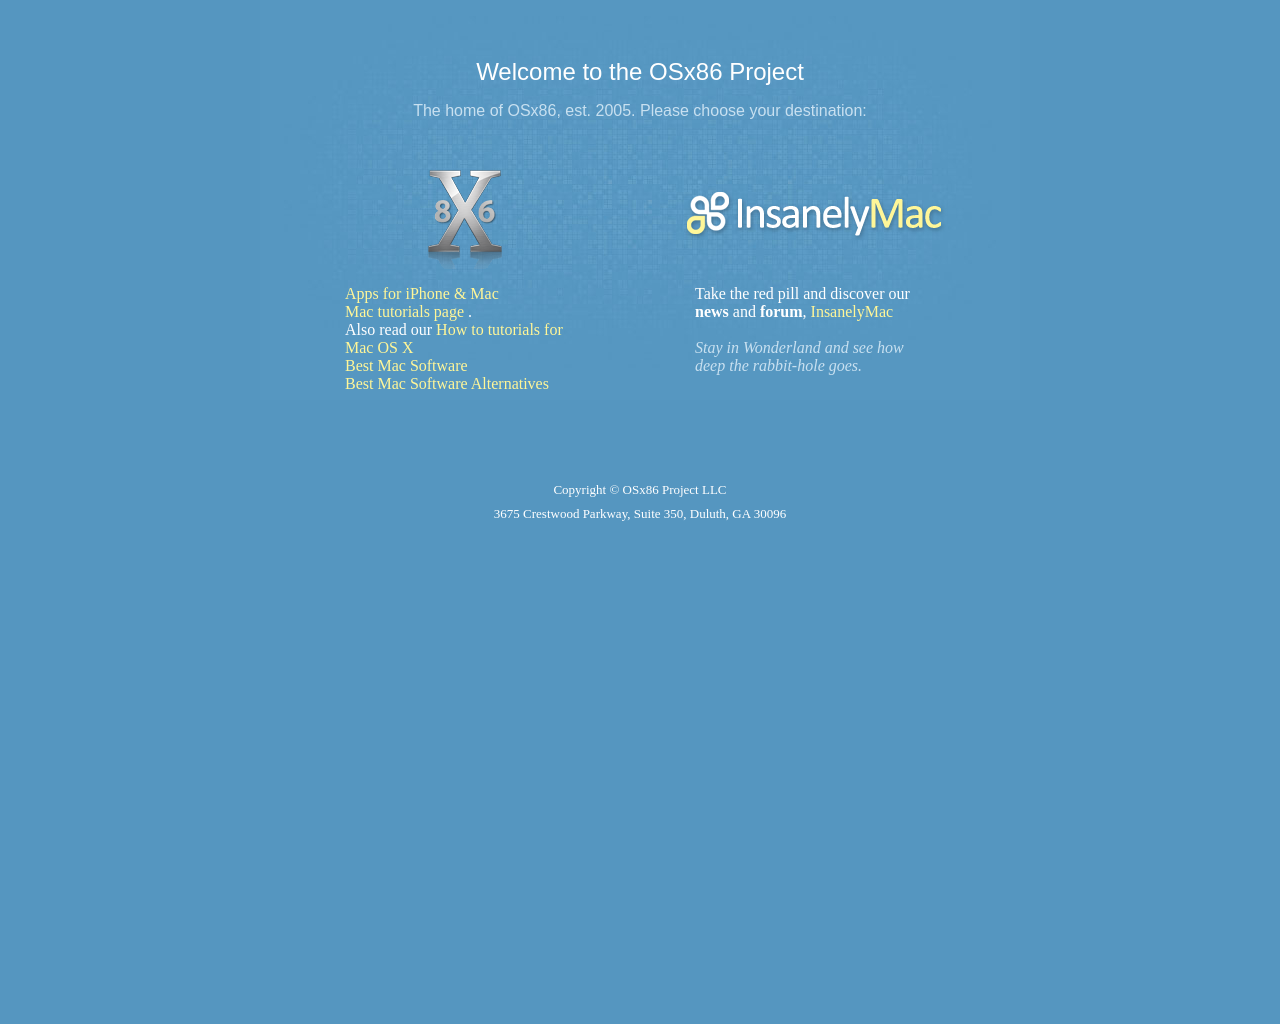 osx86project.org